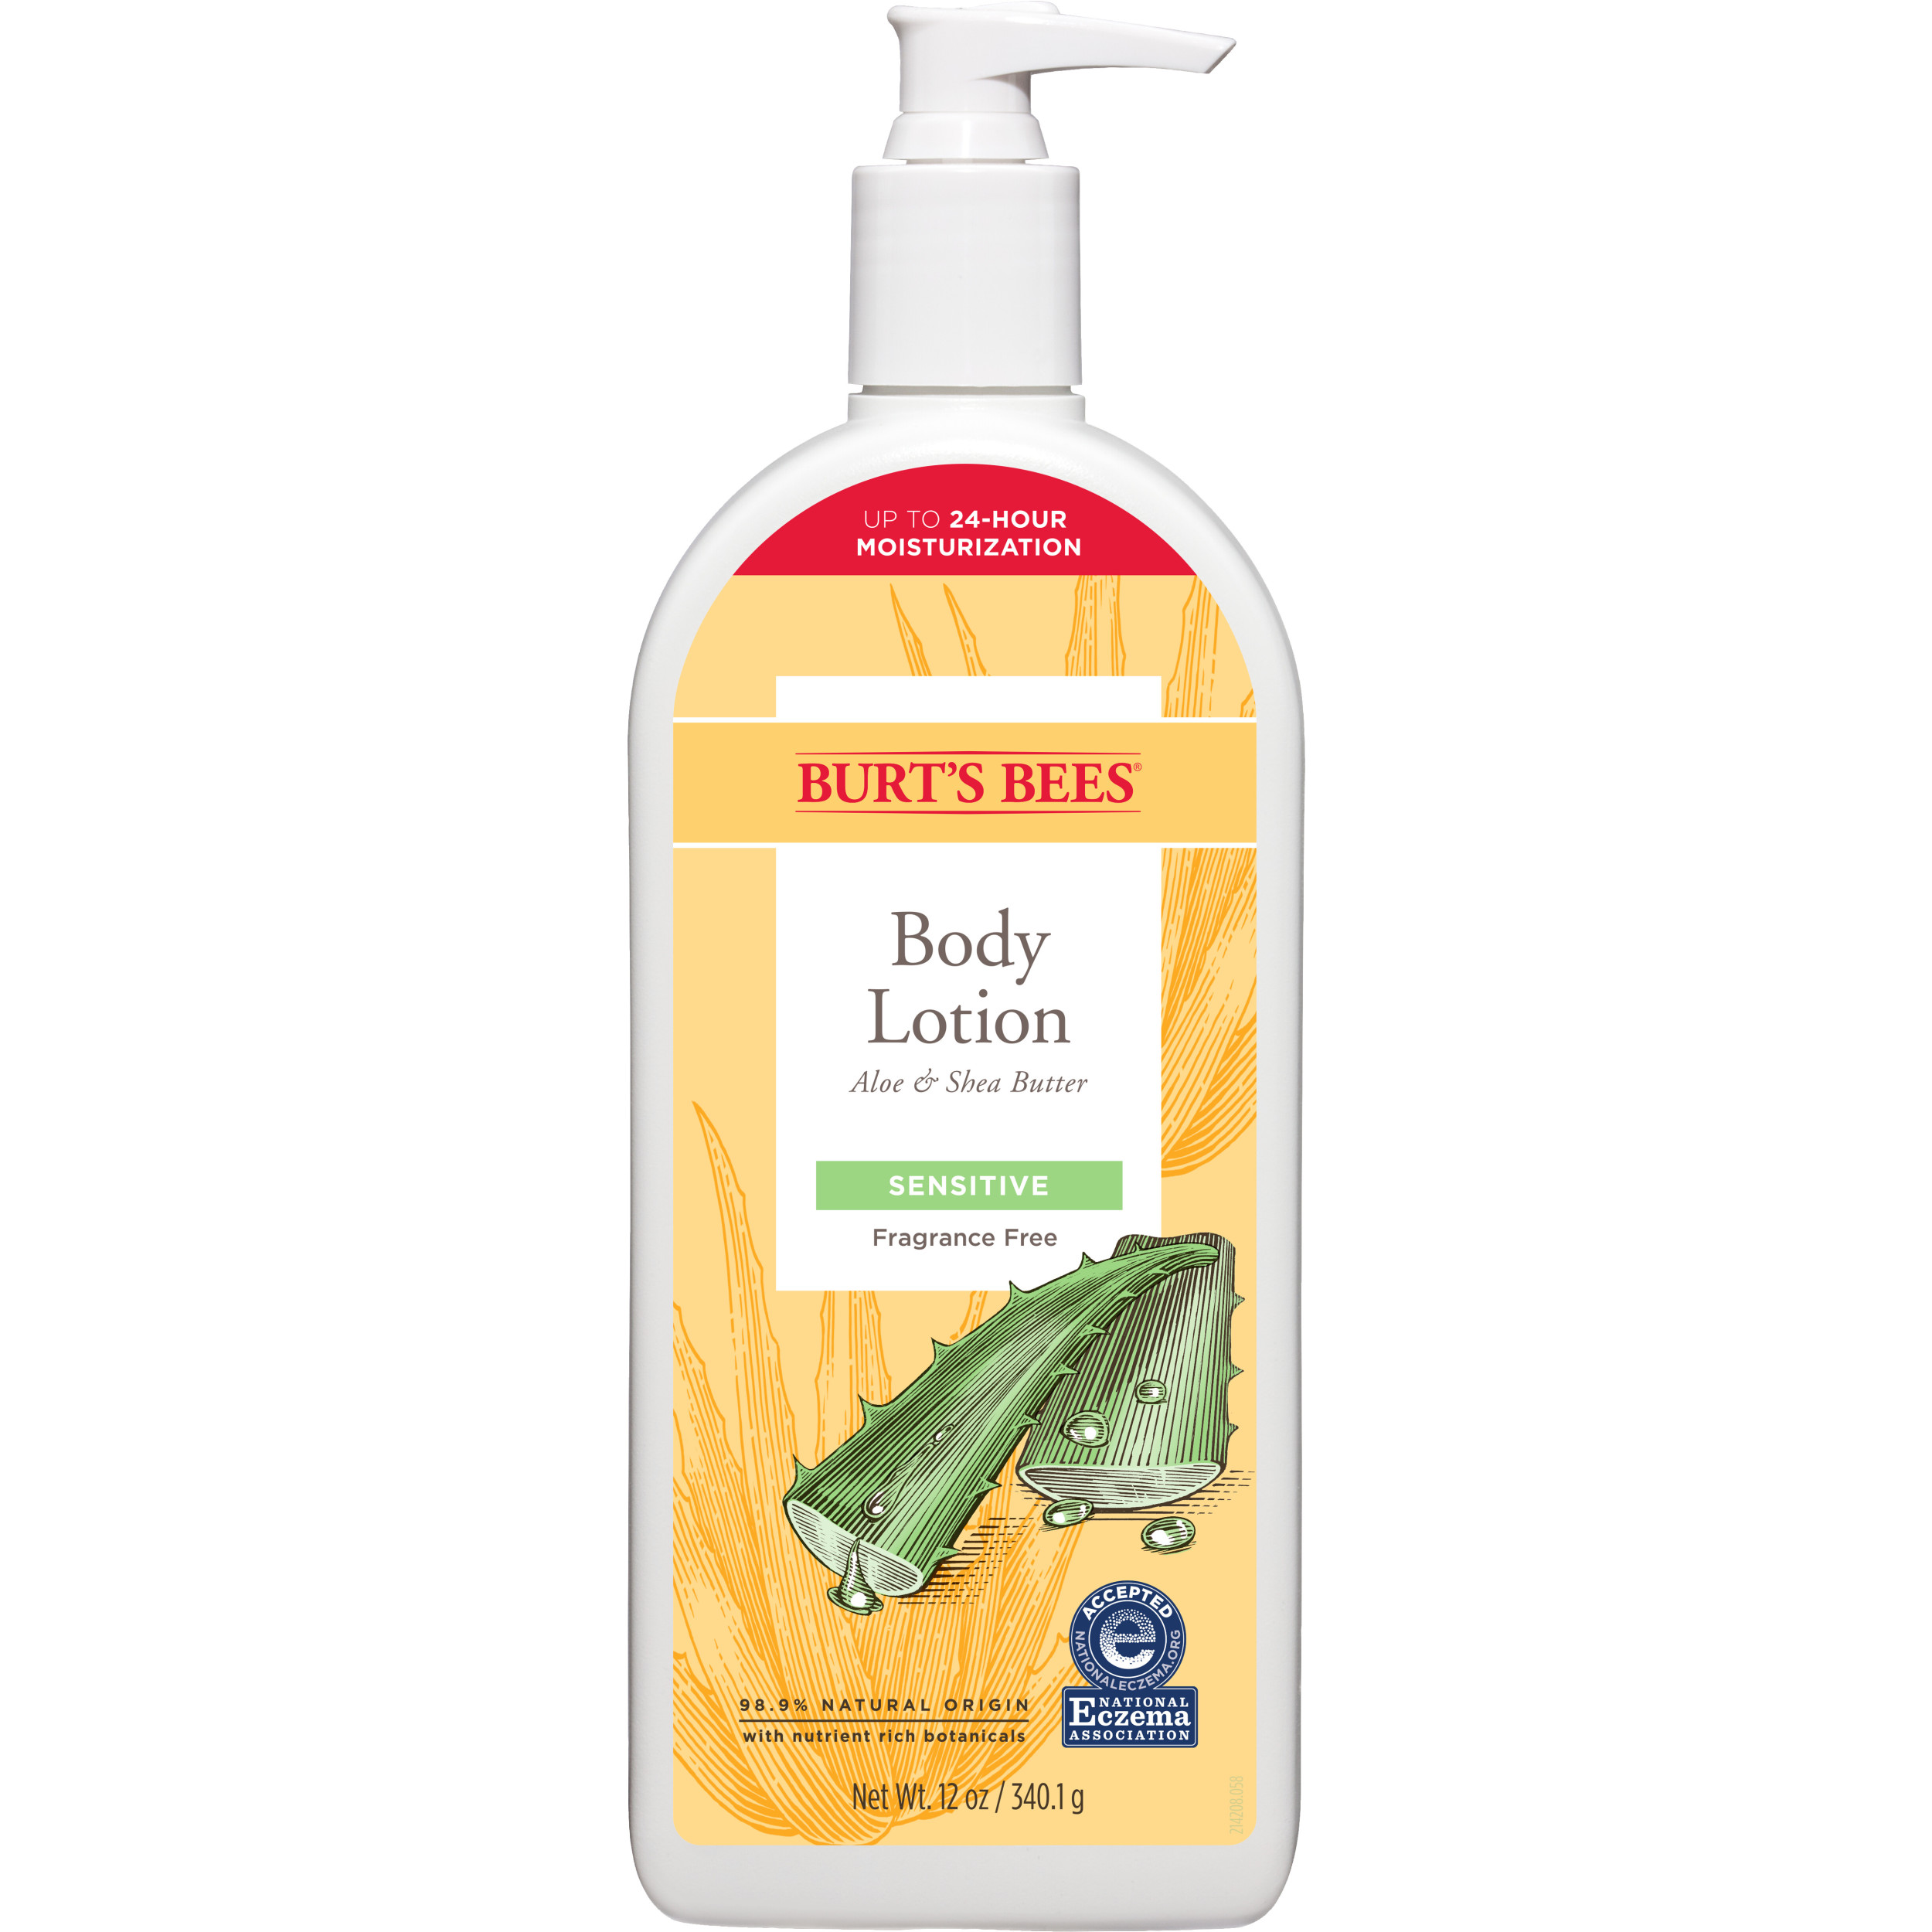 Burt's Bees Aloe Body Lotion for Sensitive Skin with Shea Butter, 12 oz - image 1 of 9